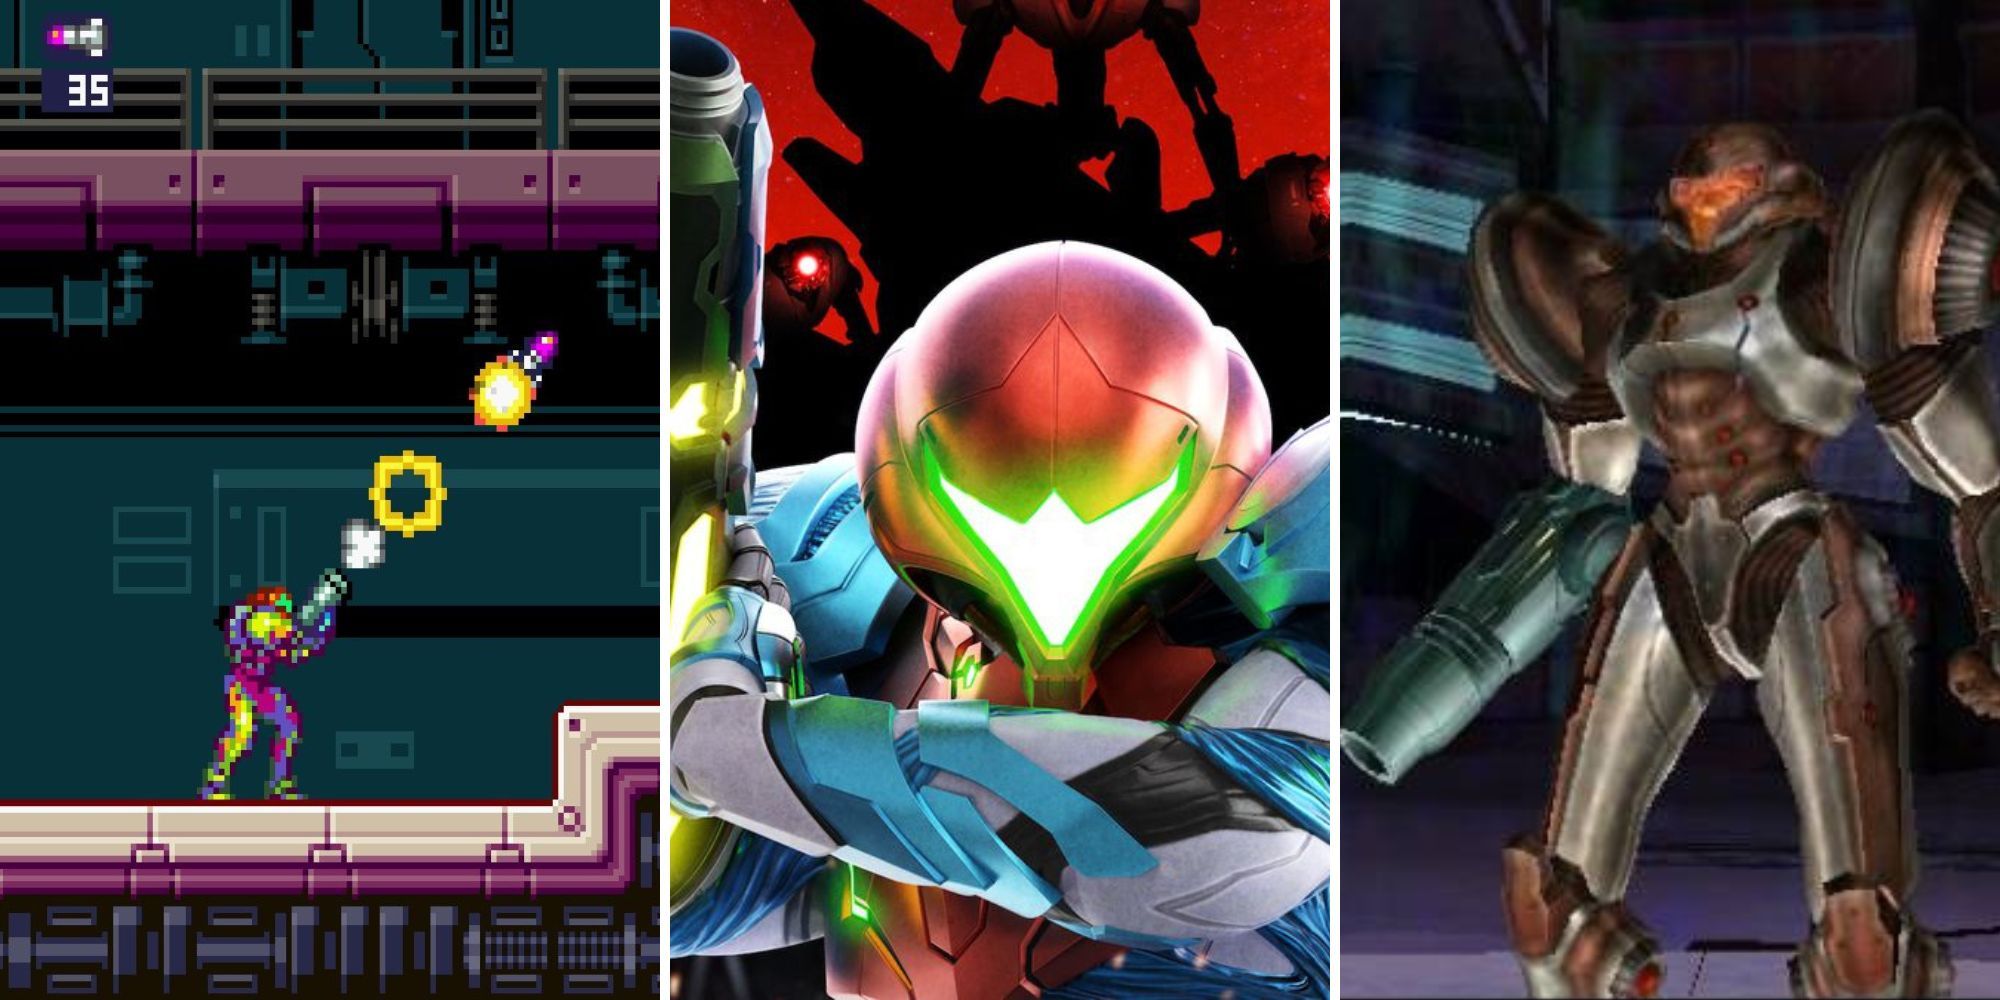 Metroid: The Best Games In The Series According to Metacritic